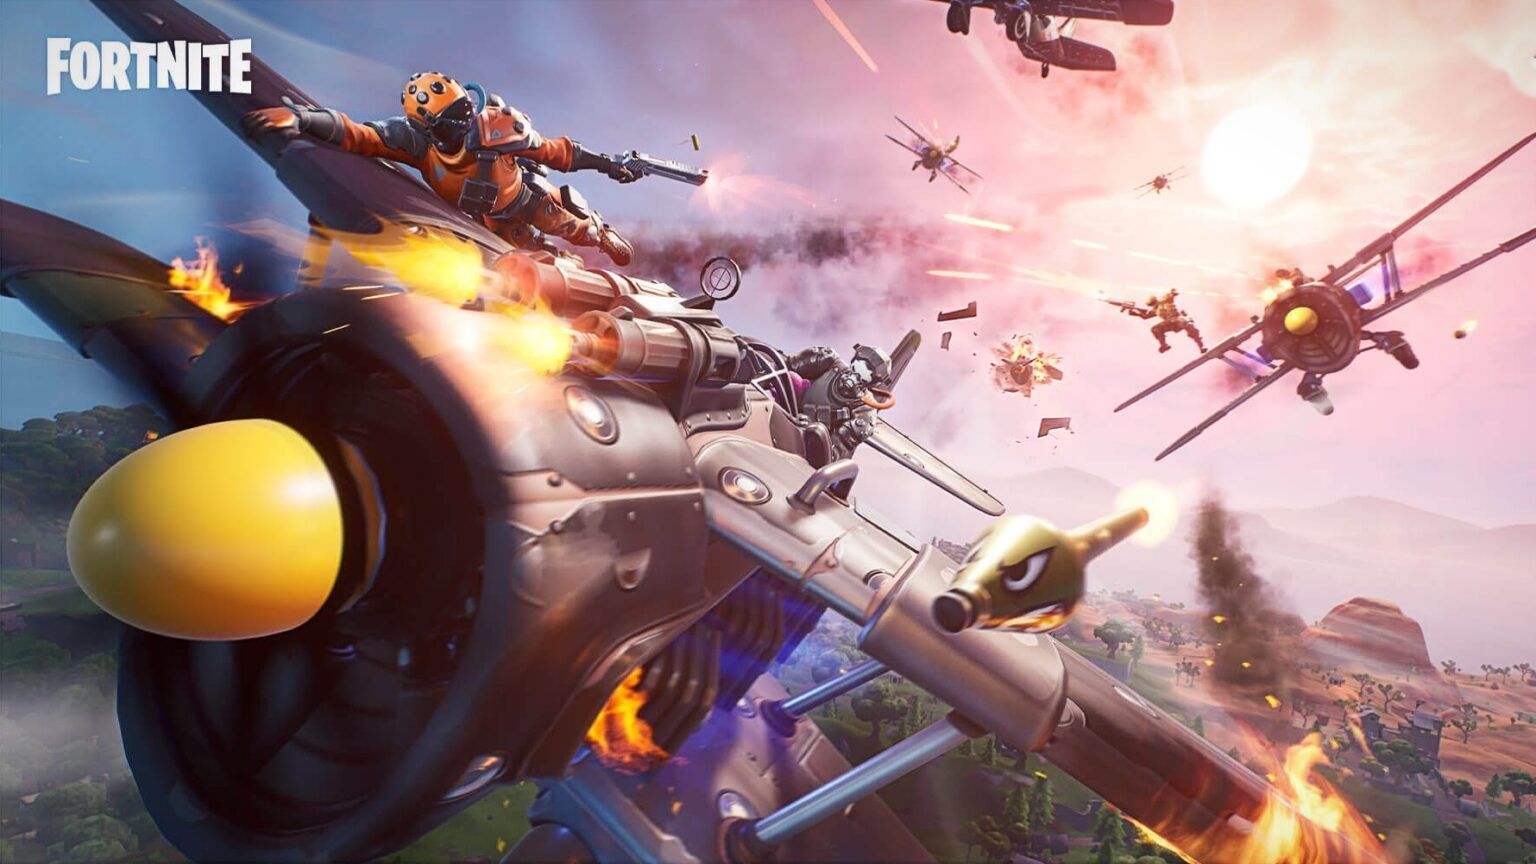 Take flight in Fortnite with the return of the Air Royale LTM ONE Esports